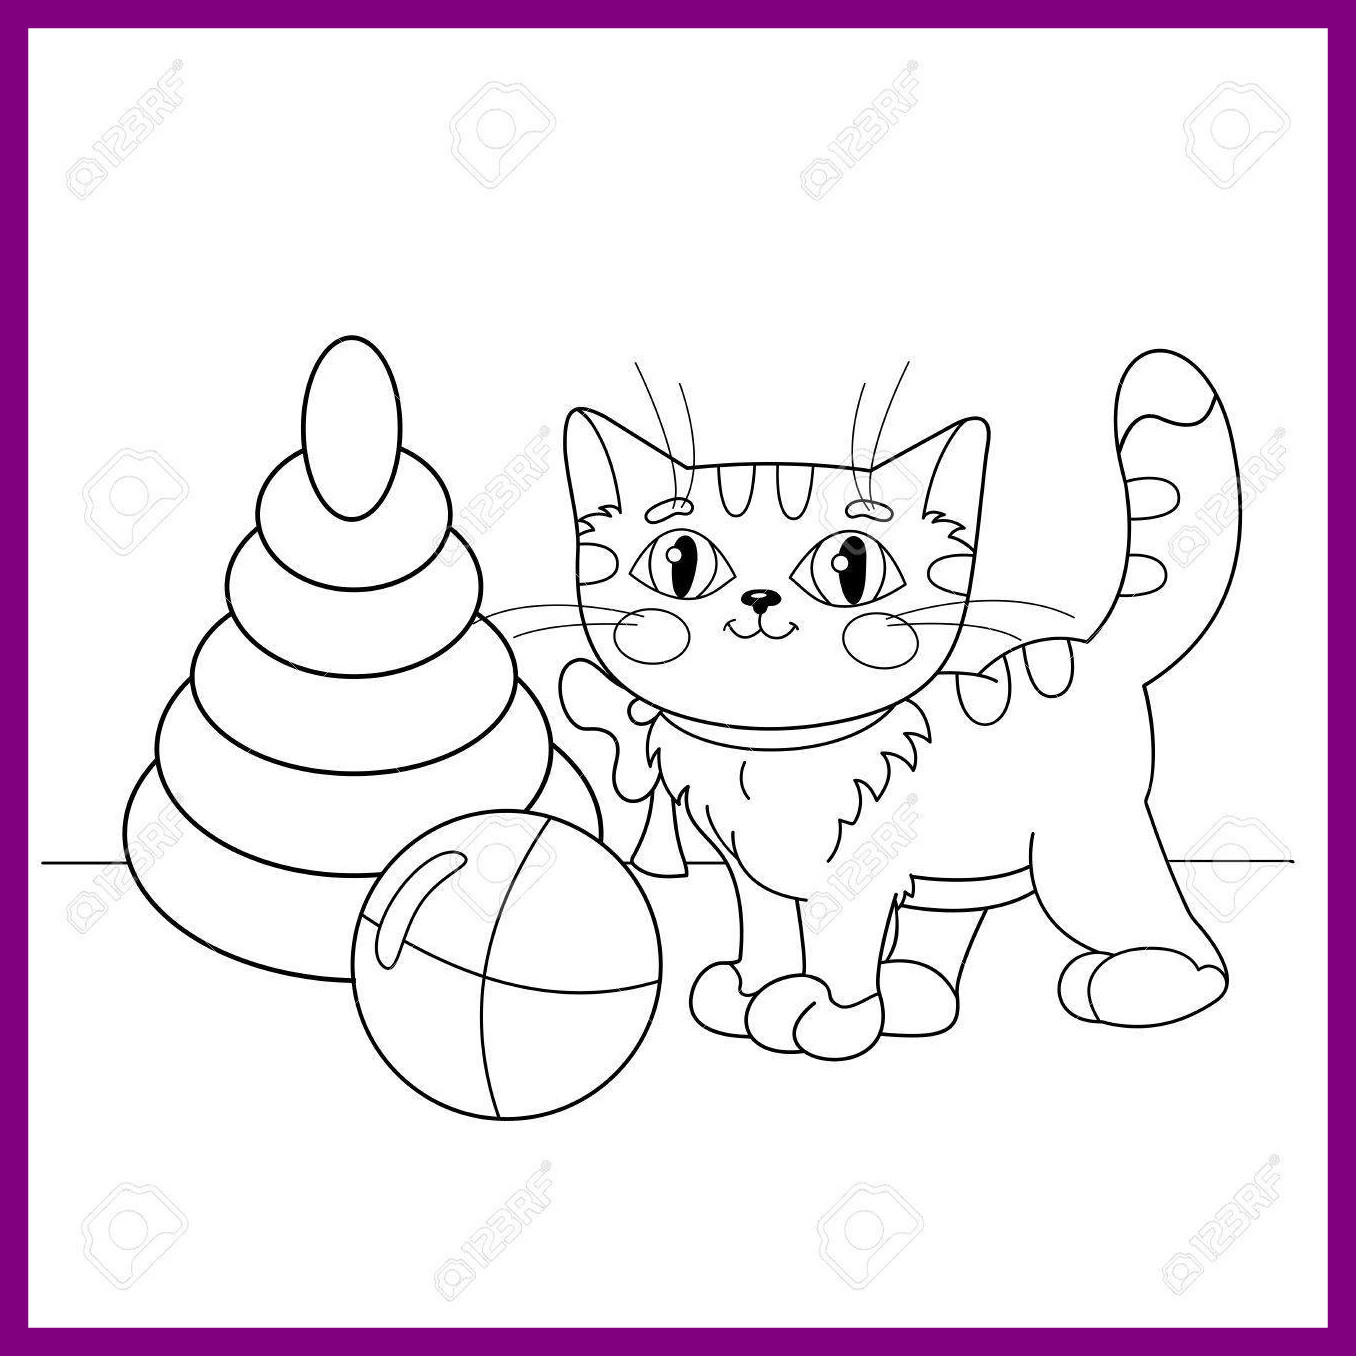 Calico Cat Coloring Page at GetColorings.com | Free printable colorings